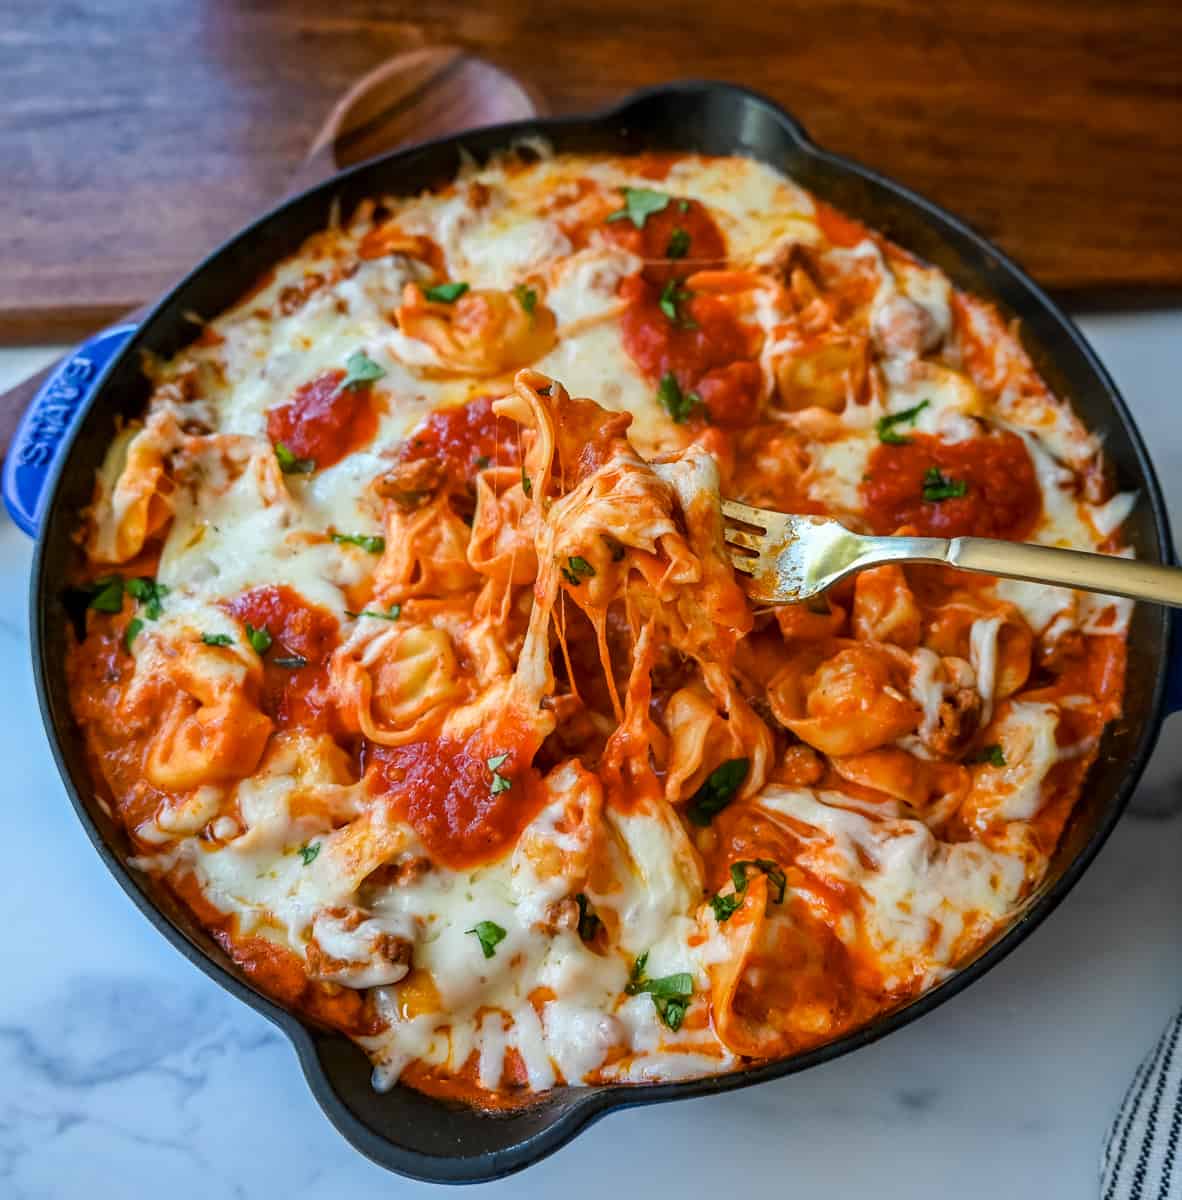 Cheese Tortellini with Sausage Ragu. This quick and easy 20 minute pasta bake is made with cheese tortellini in an Italian sausage ragu sauce and topped with cheesy melted mozzarella cheese. Everyone loves this easy pasta dinner made with only 5 ingredients!